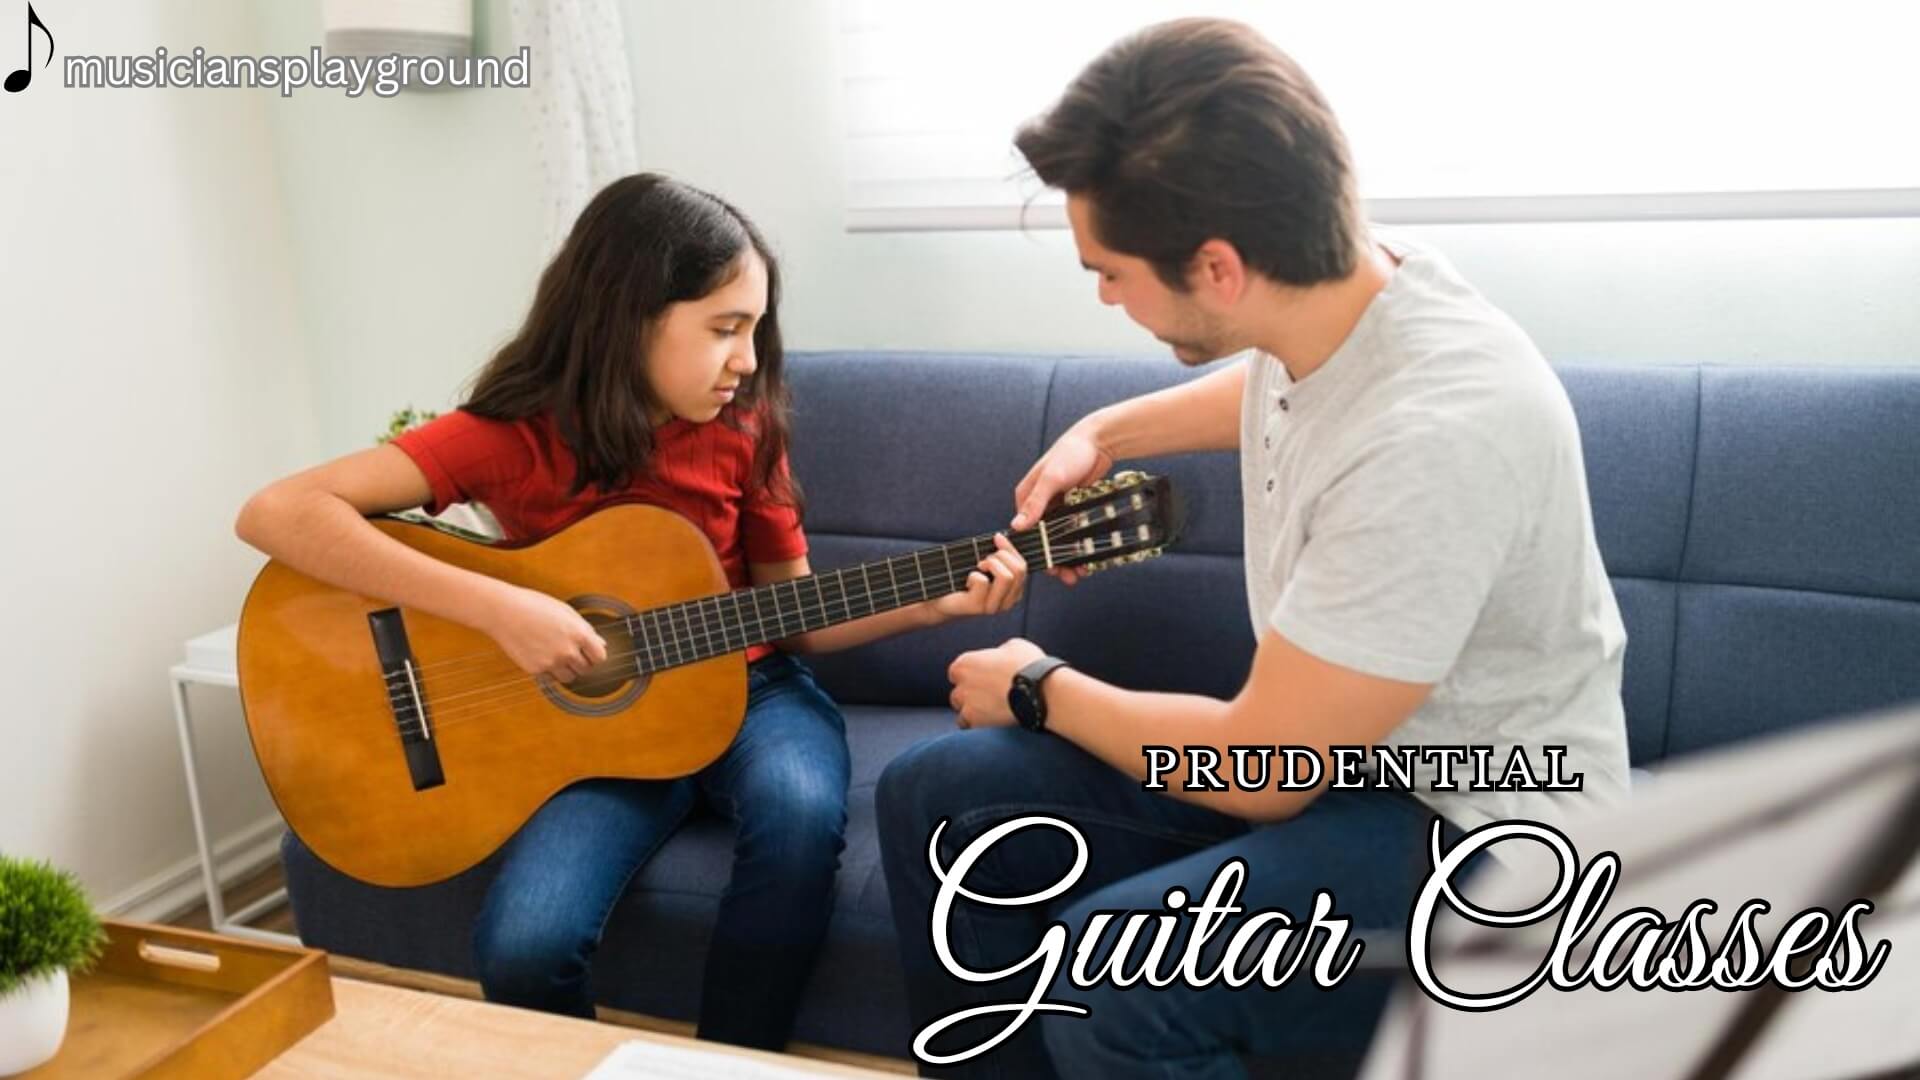 Welcome to Musicians Playground: Guitar Classes in Prudential, Massachusetts